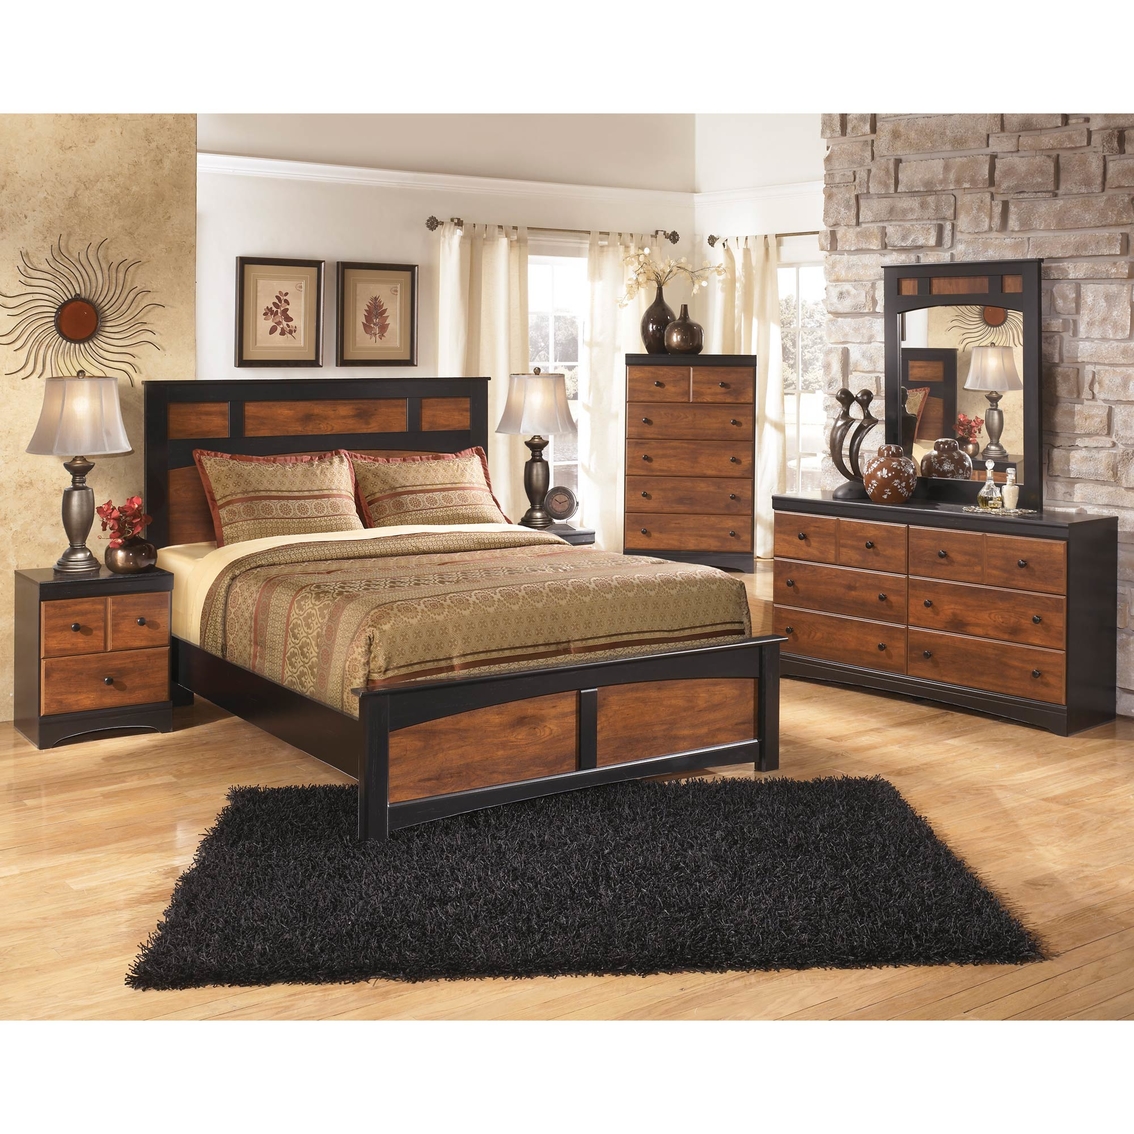 Signature Design by Ashley Aimwell Panel Bed - Image 2 of 2